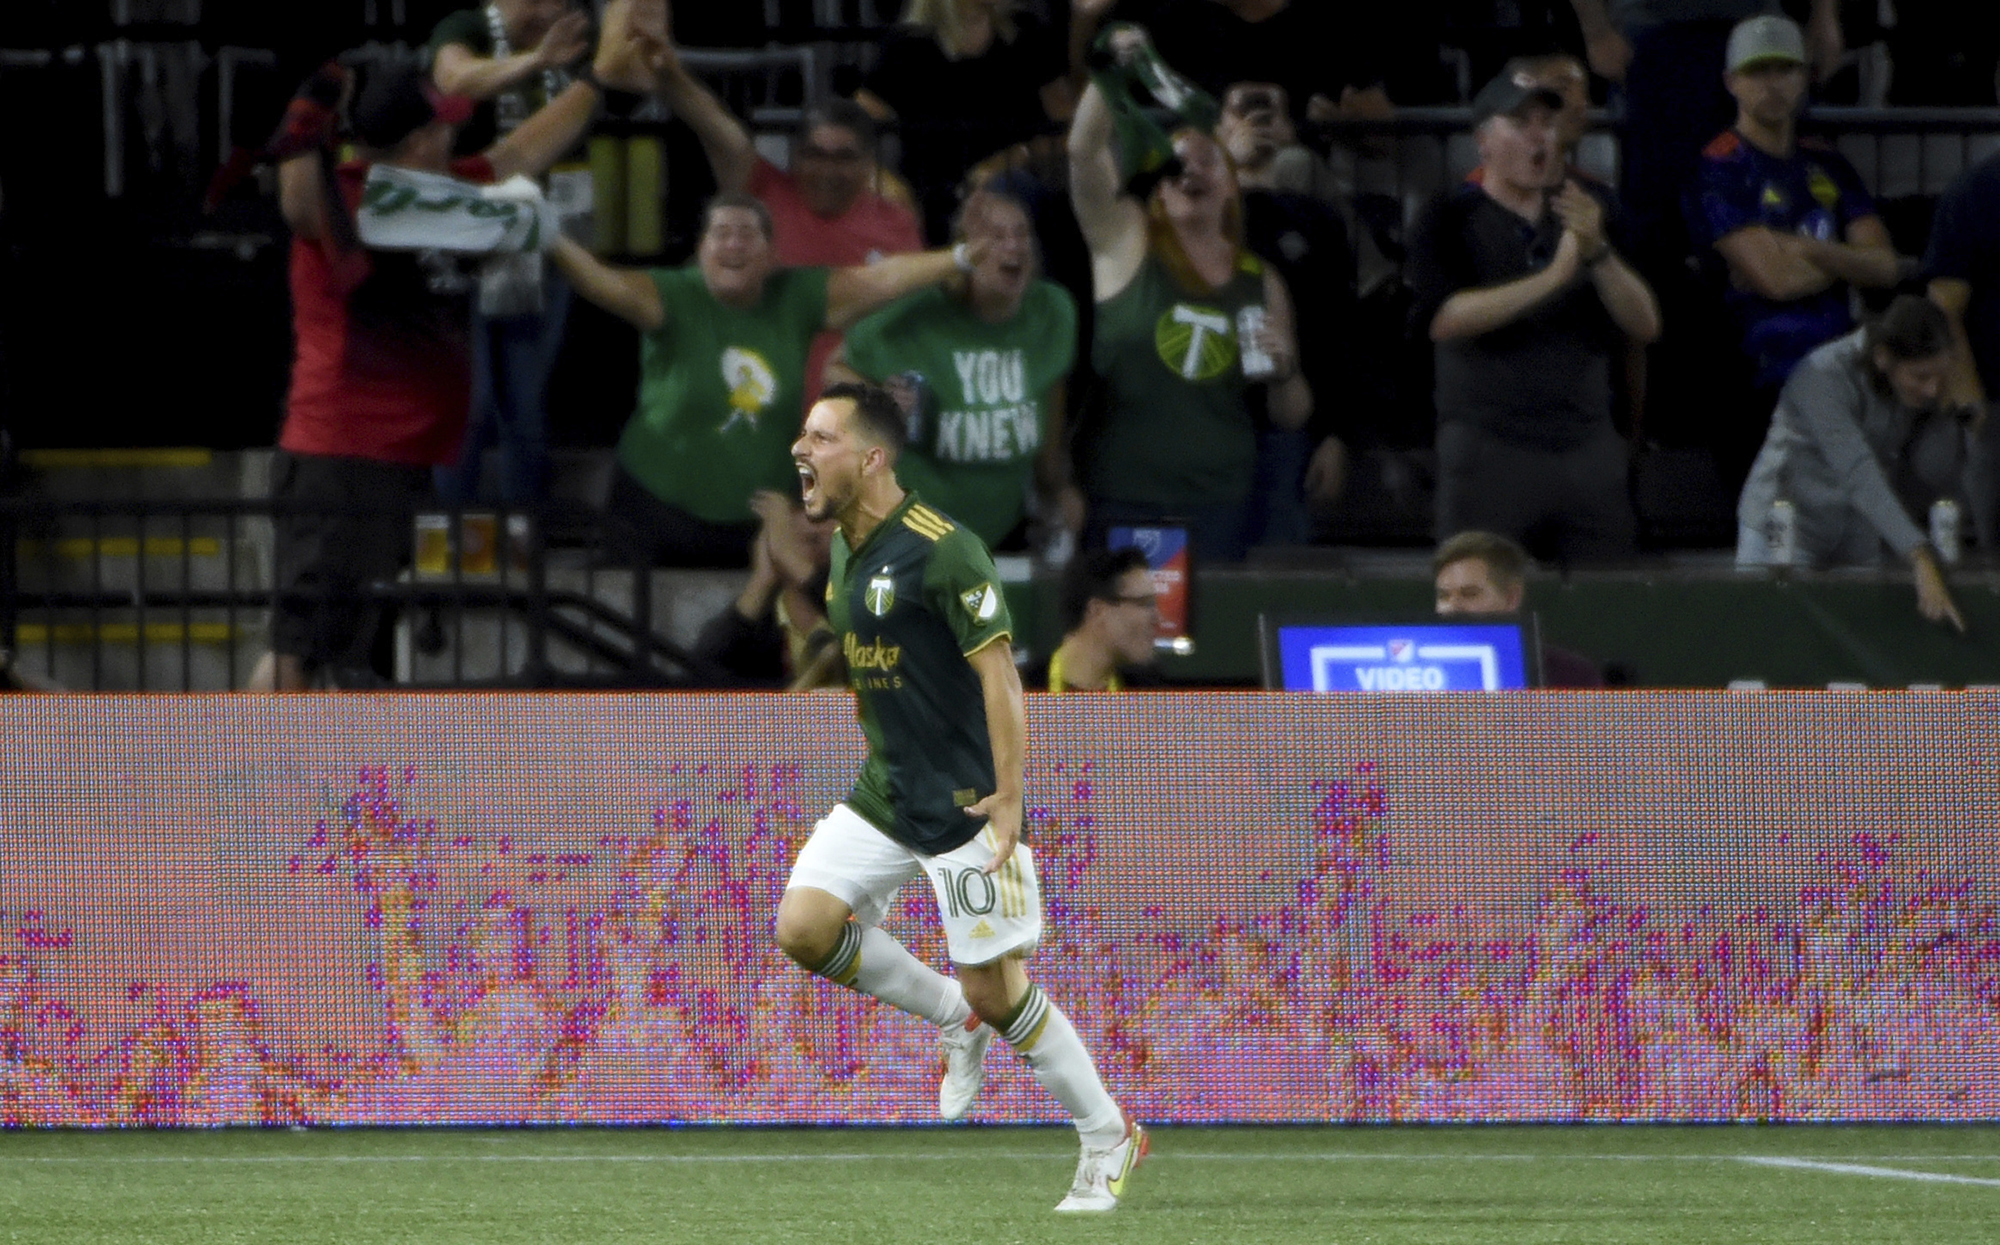 Portland Timbers midfielder Sebastián Blanco celebrates after scoring a goal during the second half of an MLS soccer match against the Seattle Sounders in Portland, Ore., Friday, Aug. 26, 2022. The Timbers won 2-1.